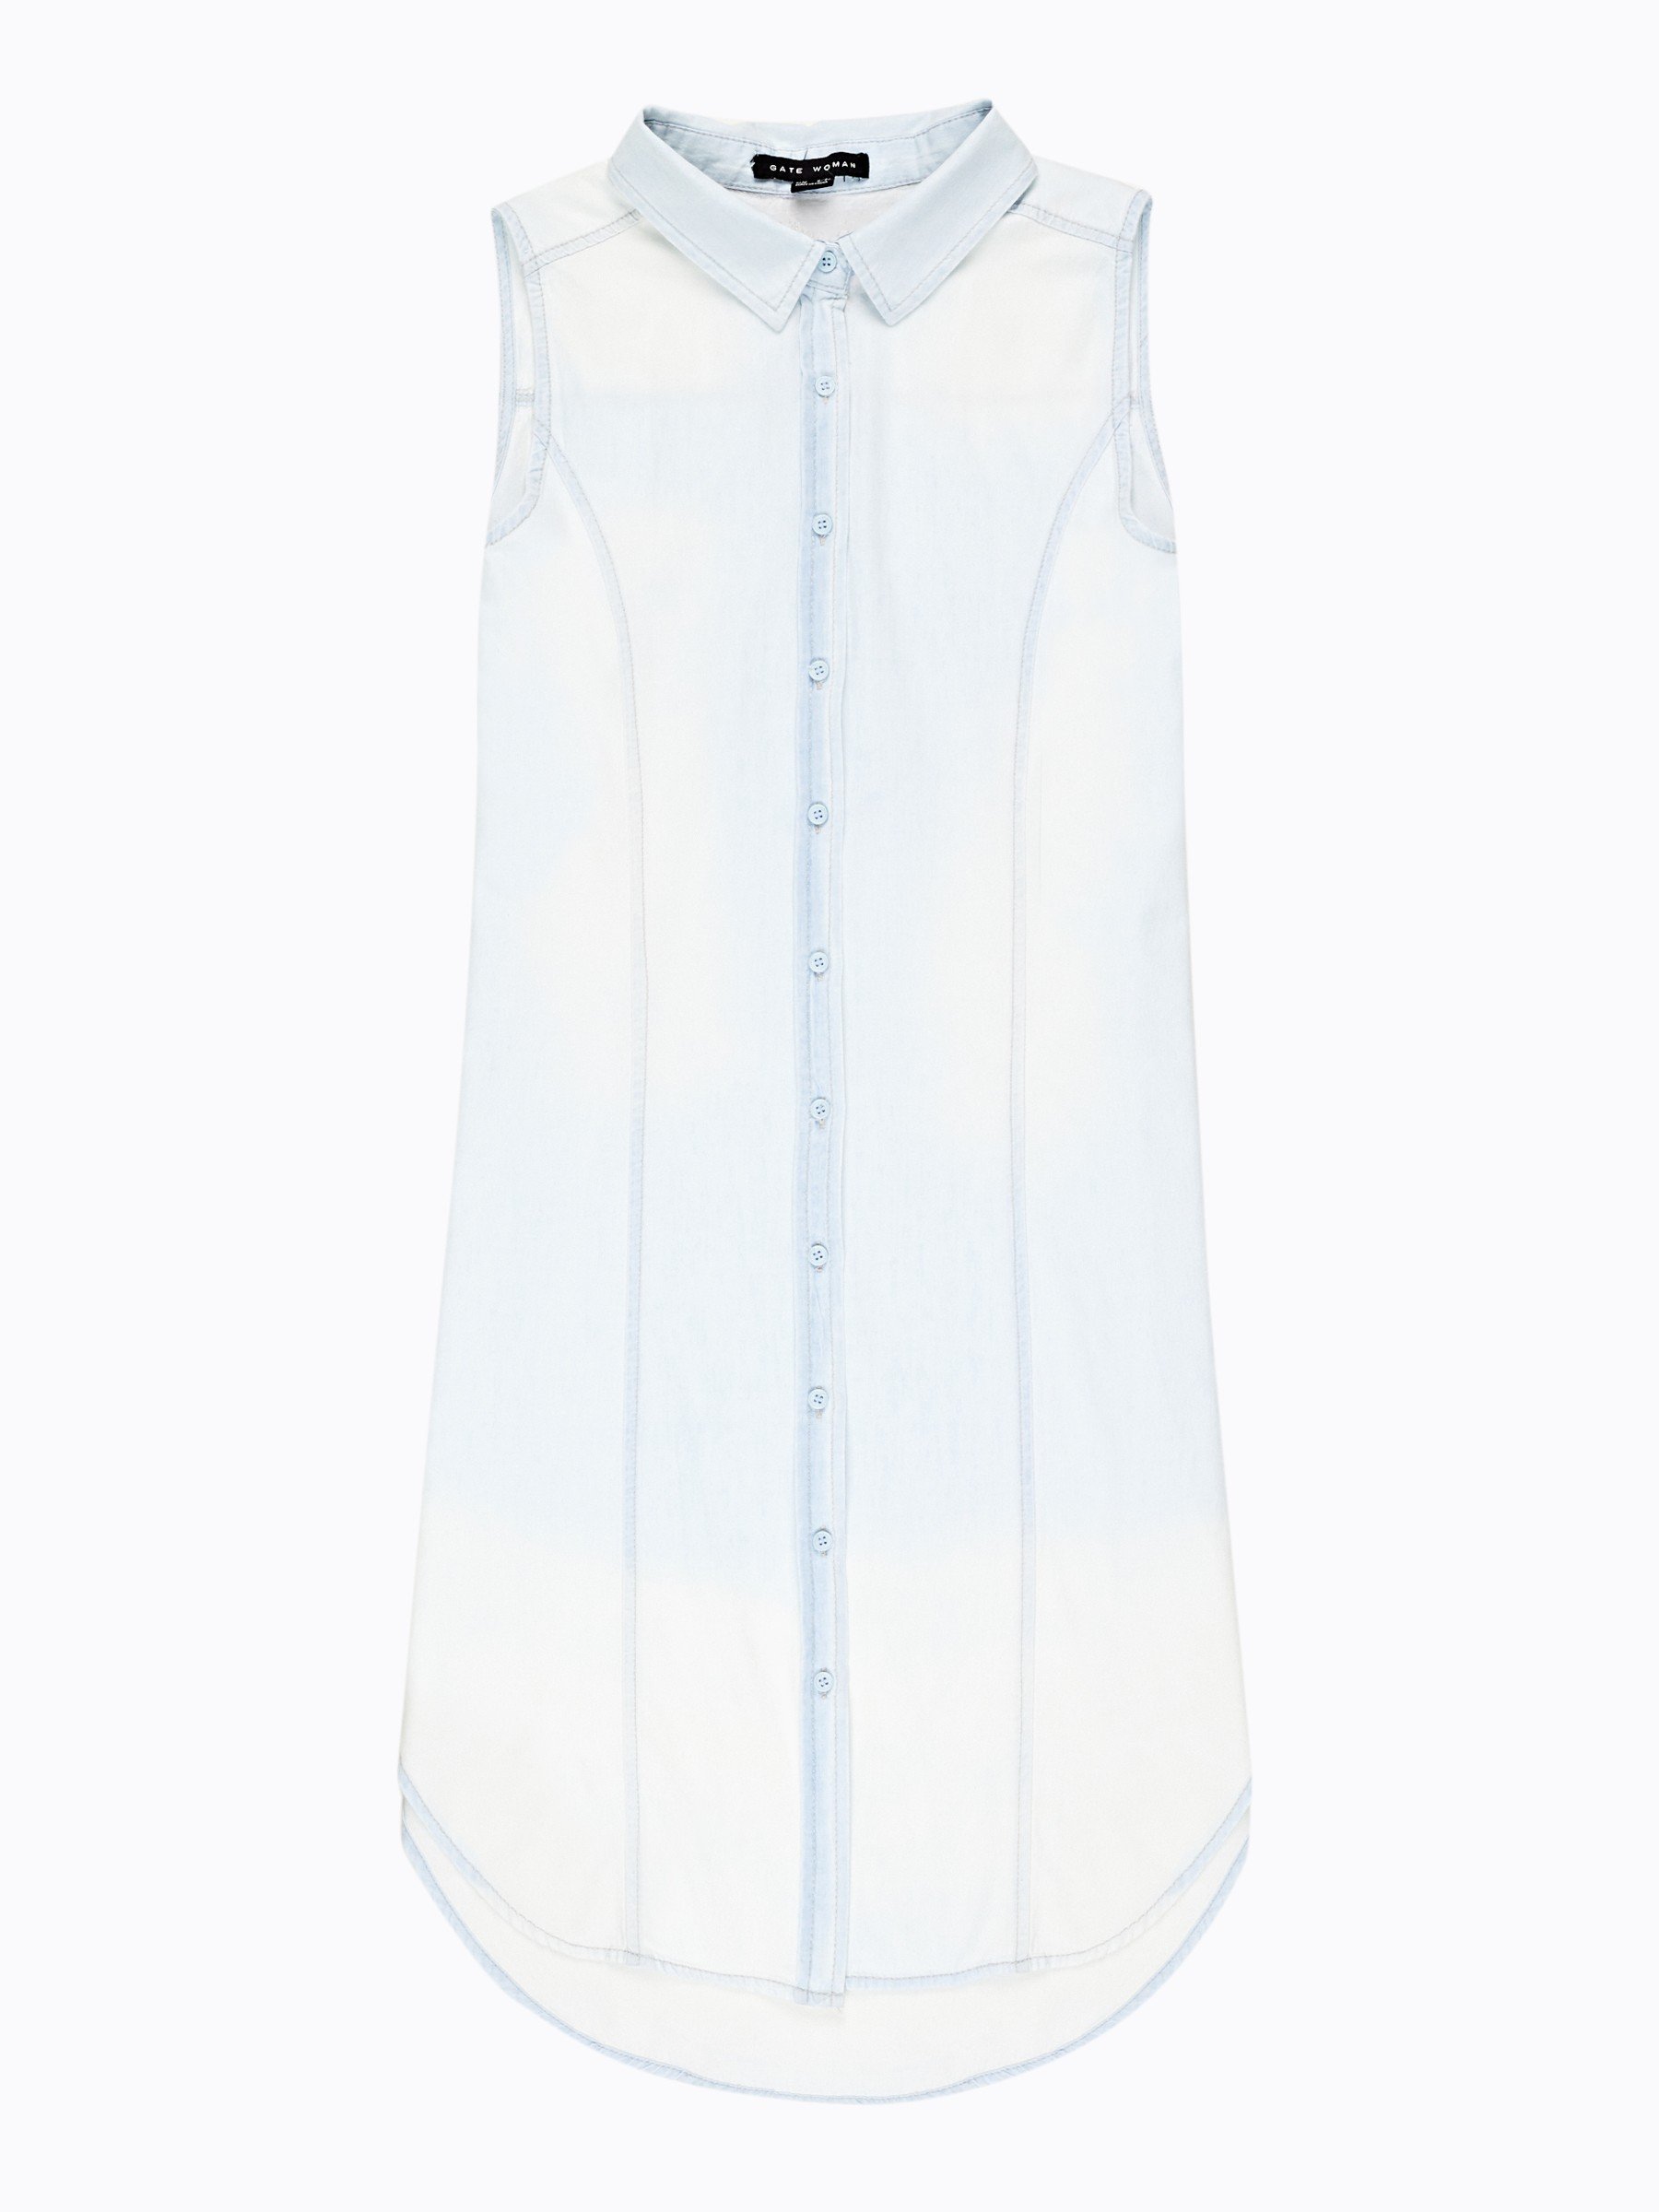 Buy > sleeveless shirt dress with collar > in stock